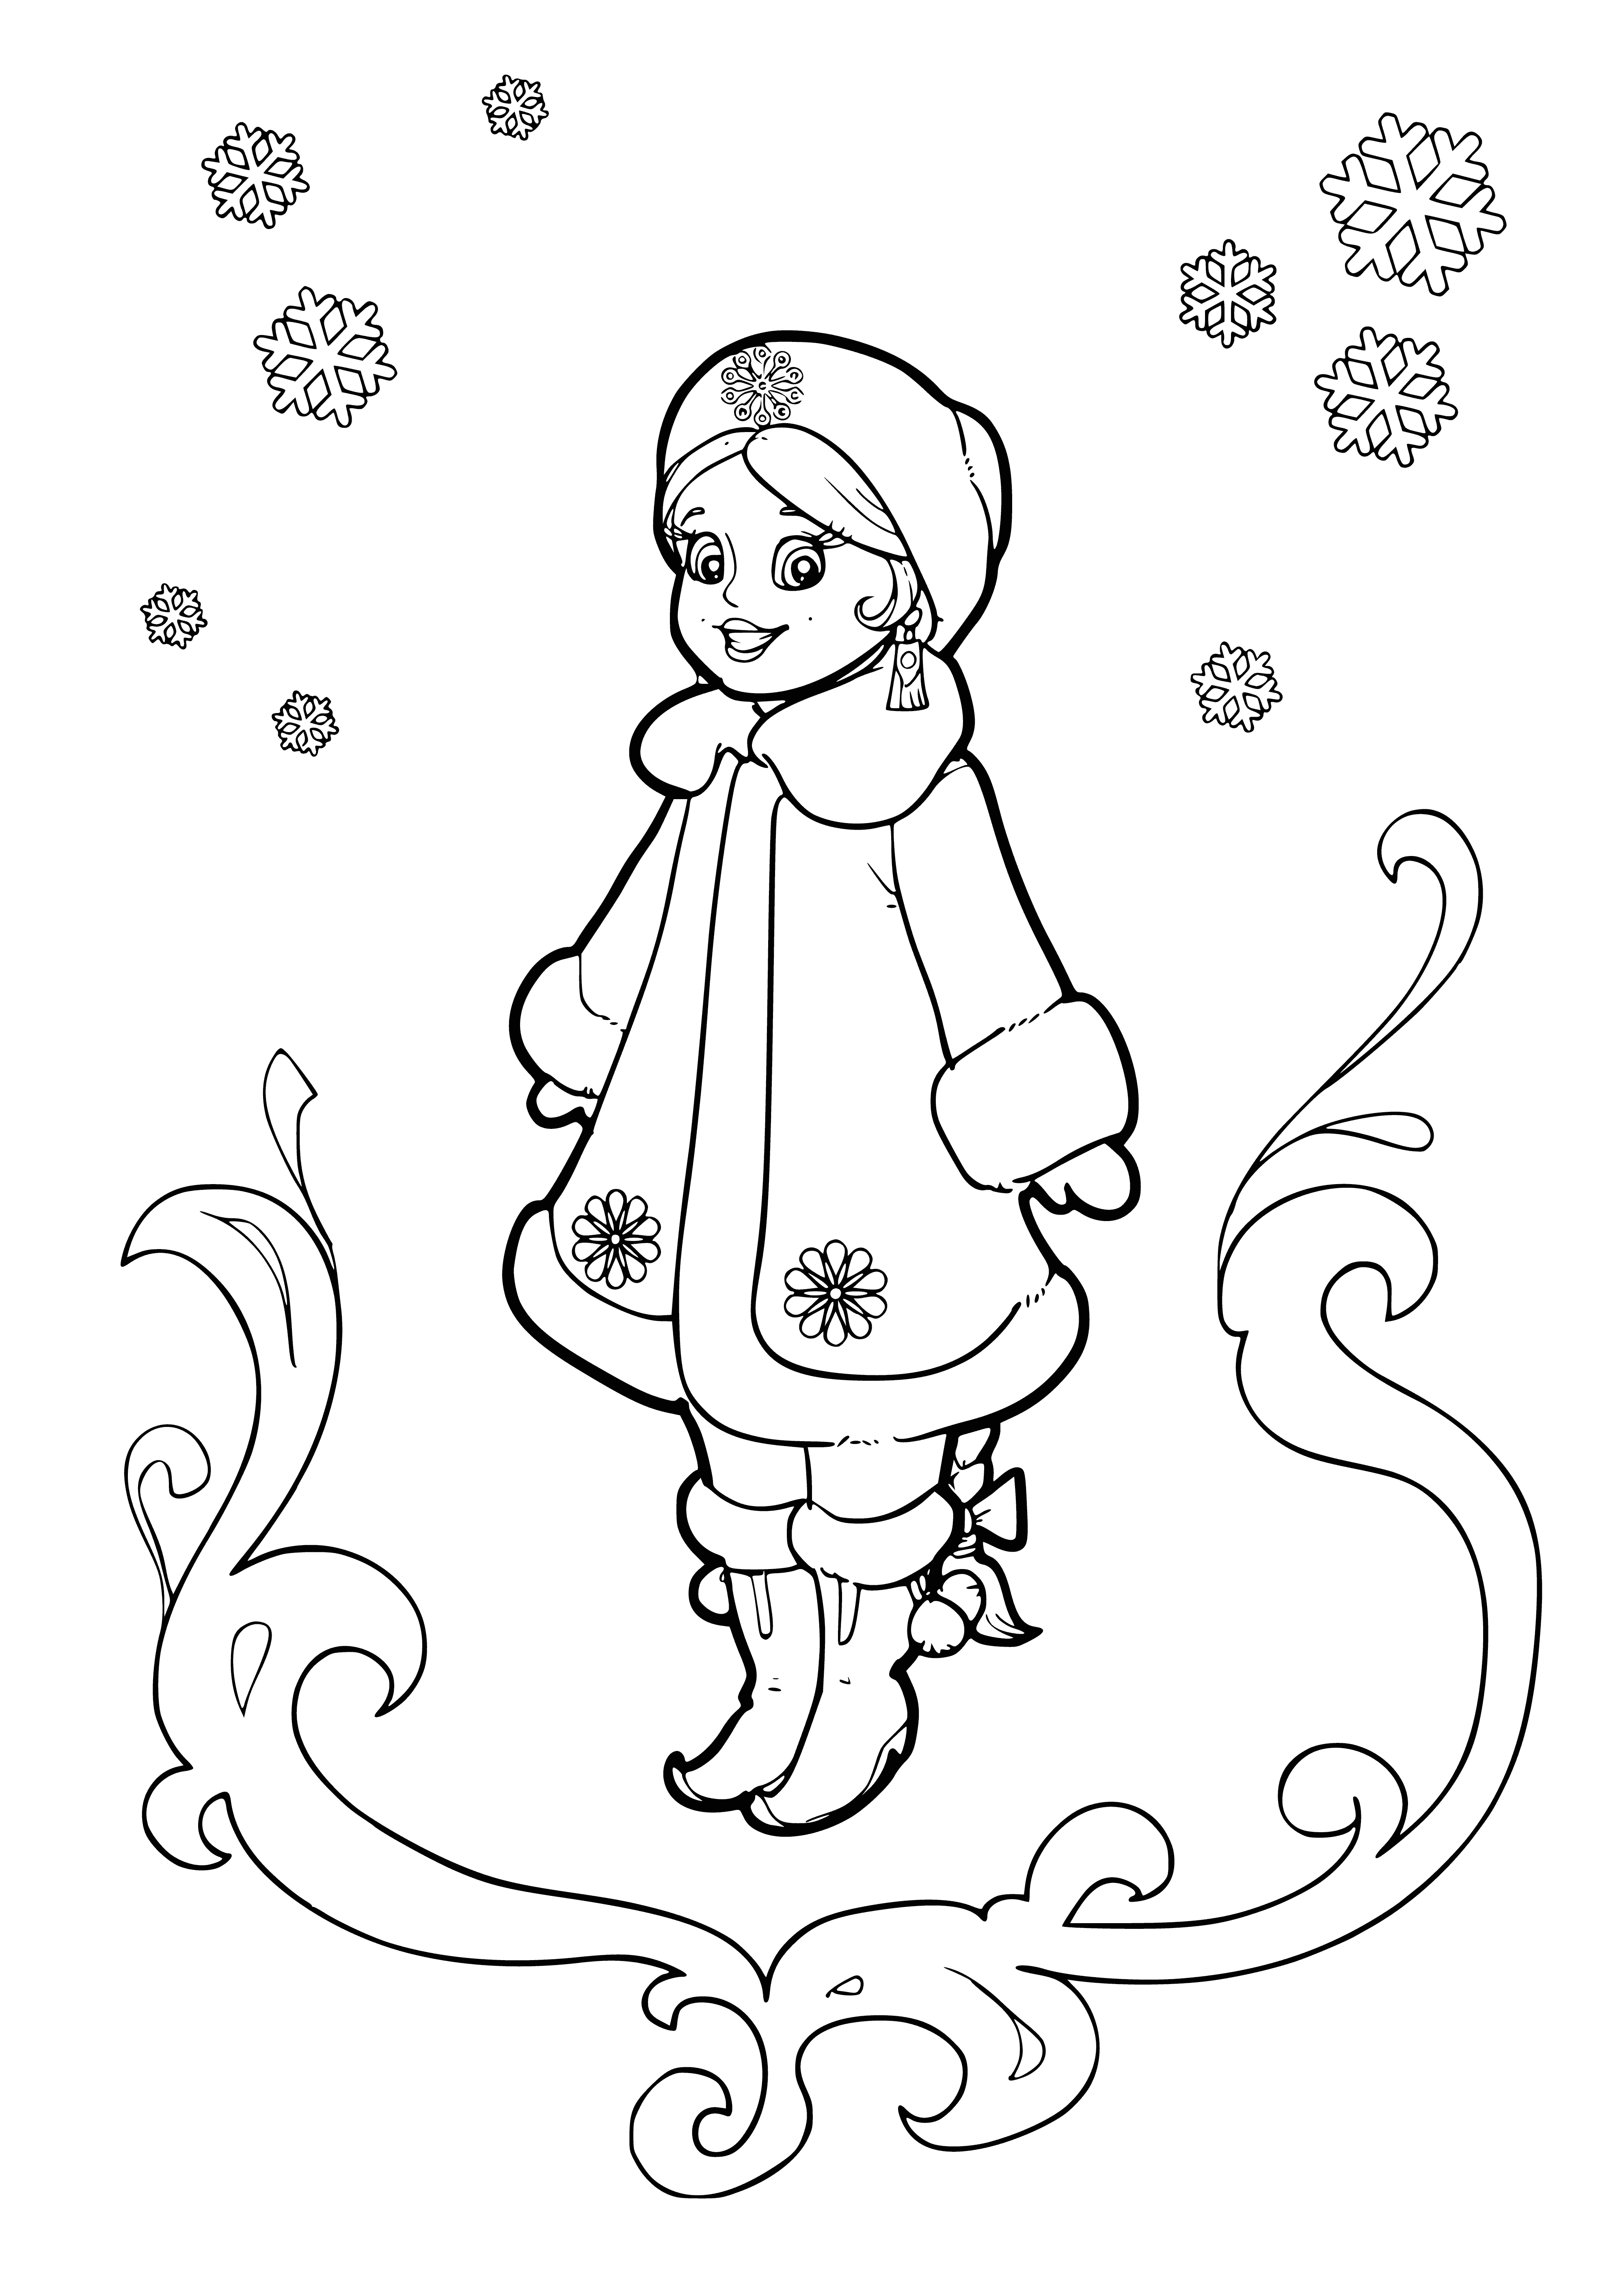 coloring page: Young girl in fringed cape & headdress sits on log in snow, mischievously holding a basket of berries--like she's up to something!